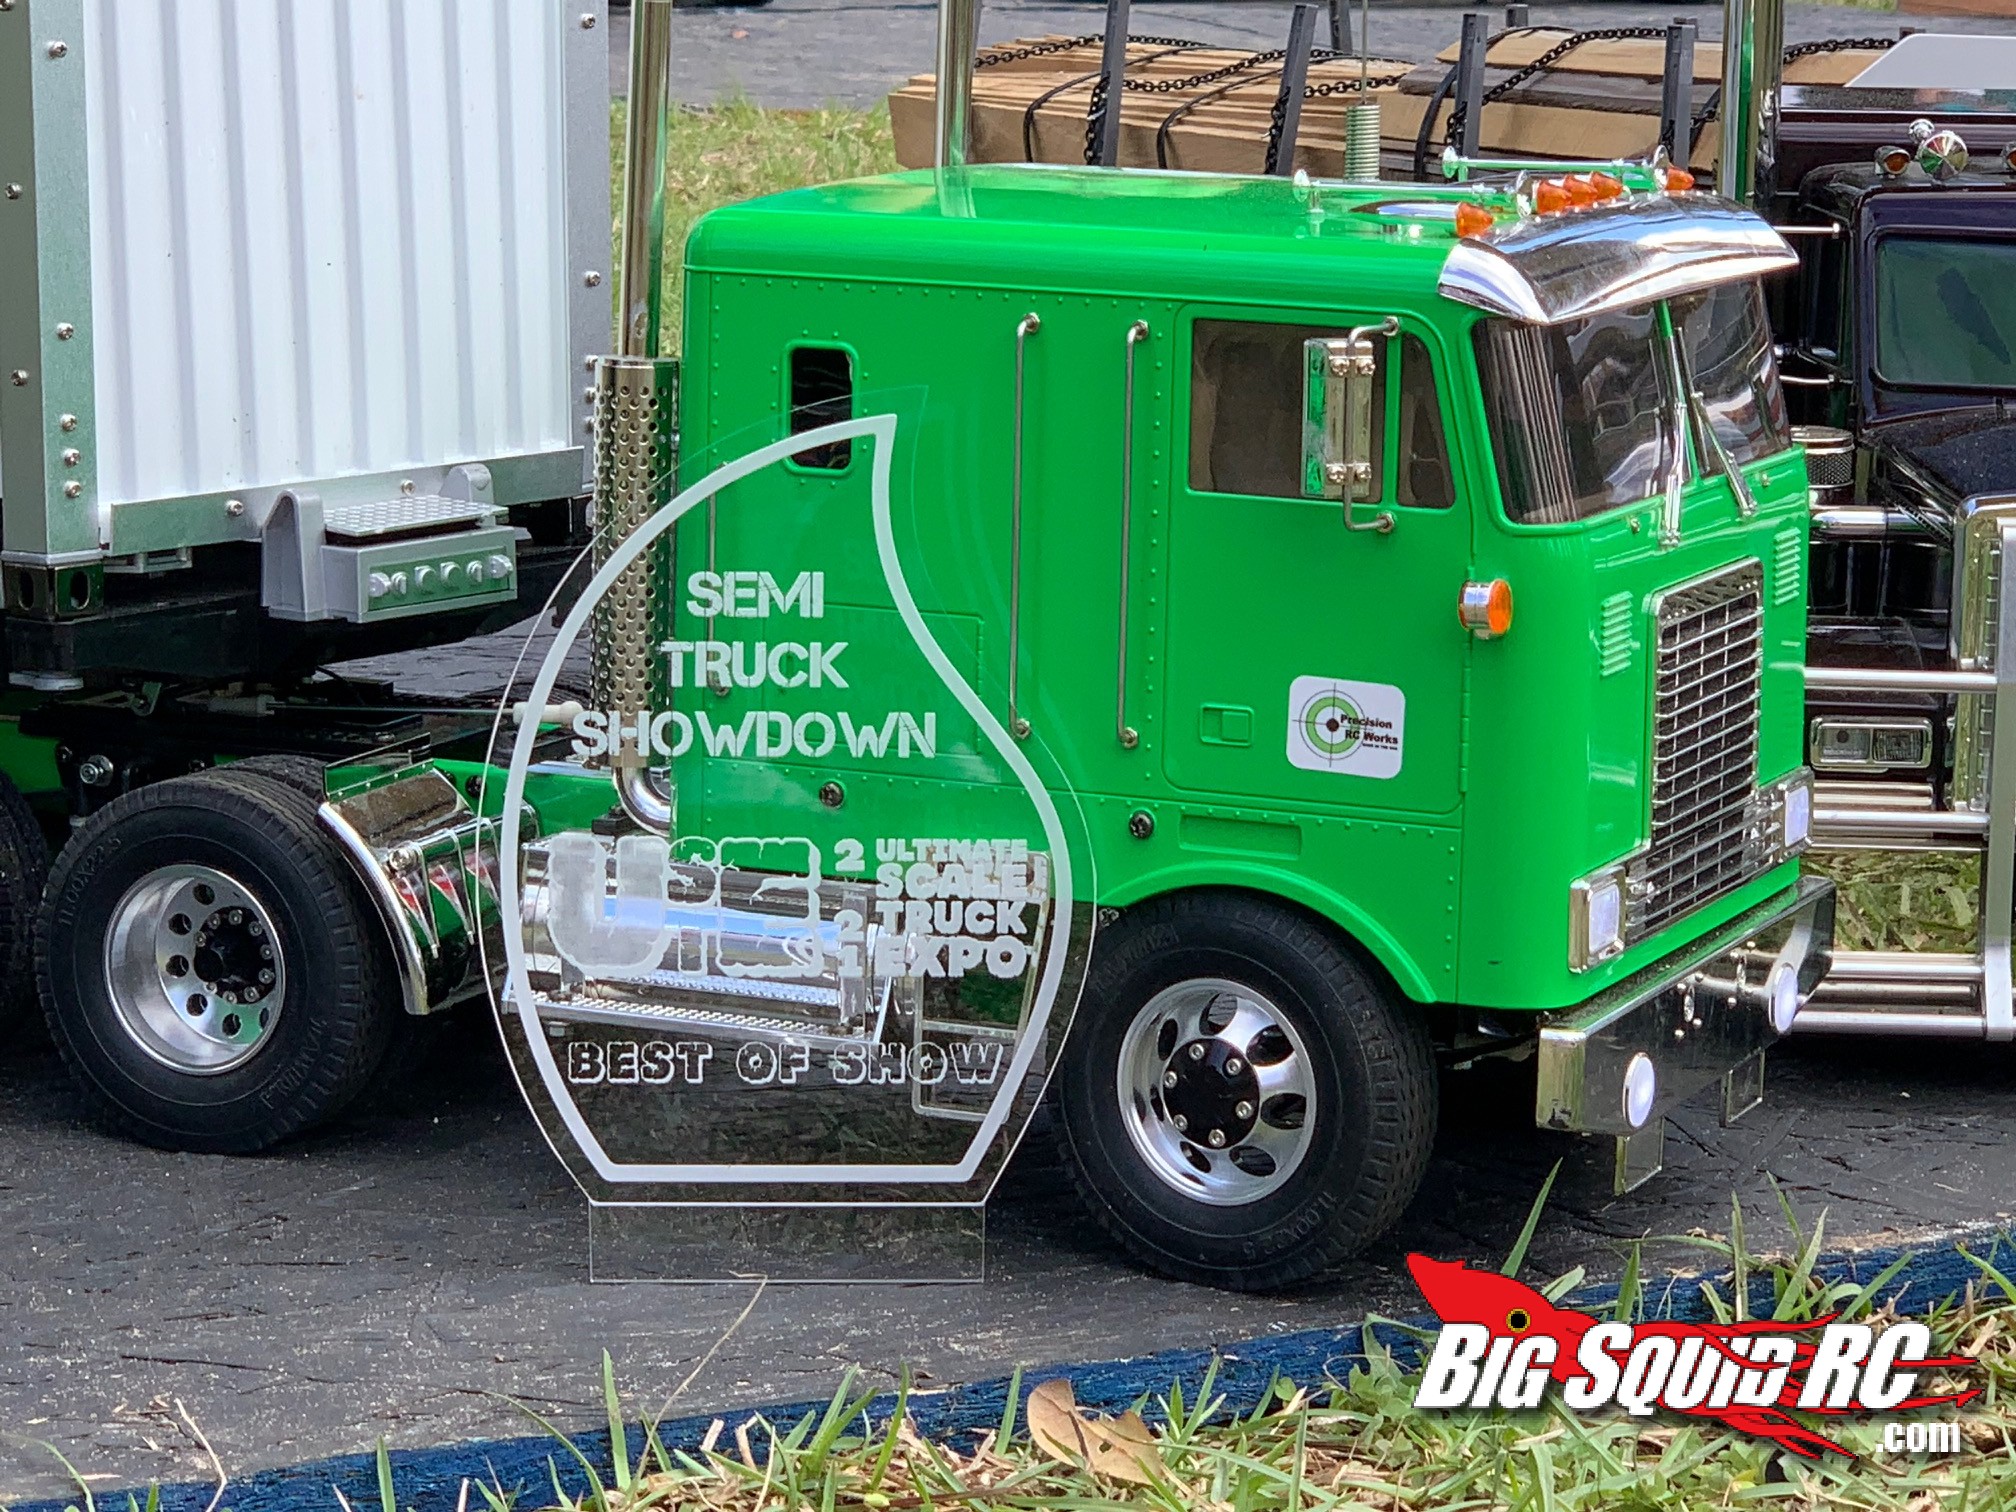 LiveRC - Incredible Monster Energy semi truck scale build carrying